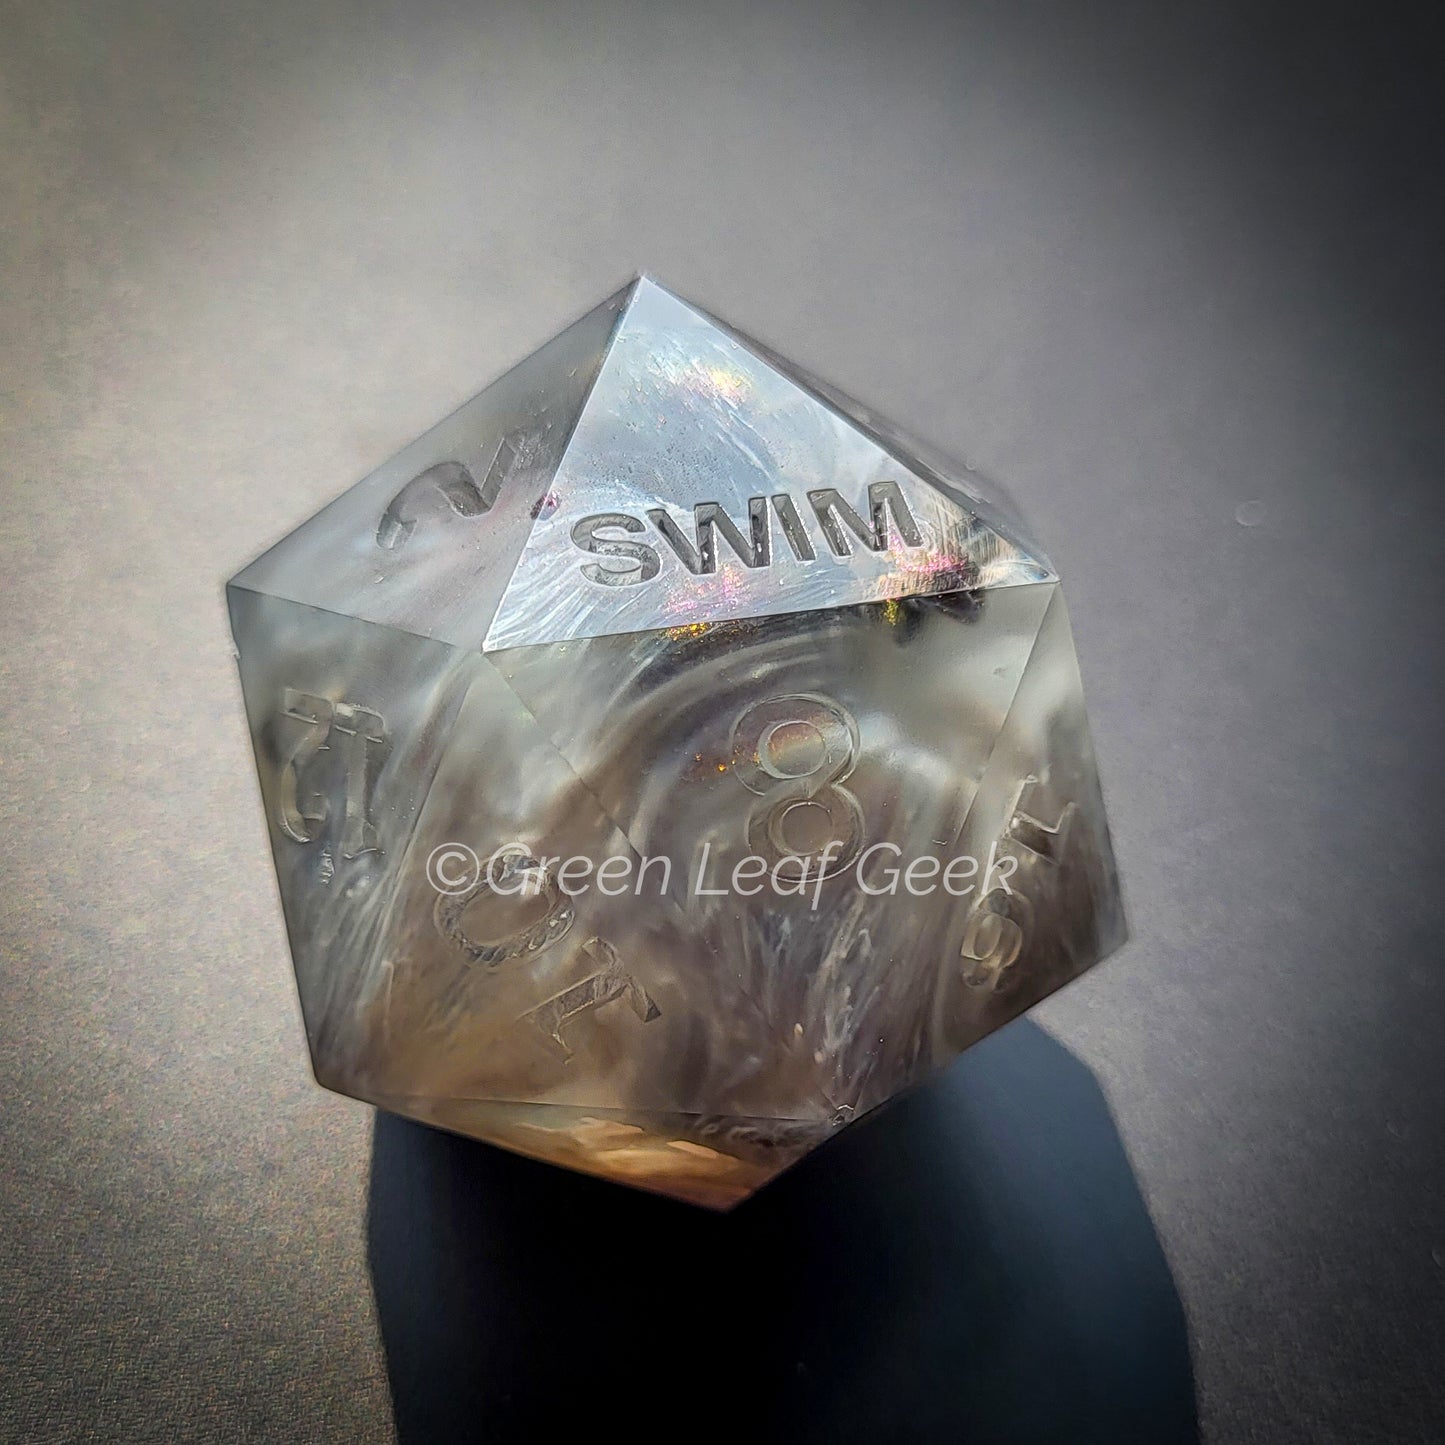 Into the Abyss - 35mm SINK or SWIM Chonk D20 - Choice of Ink